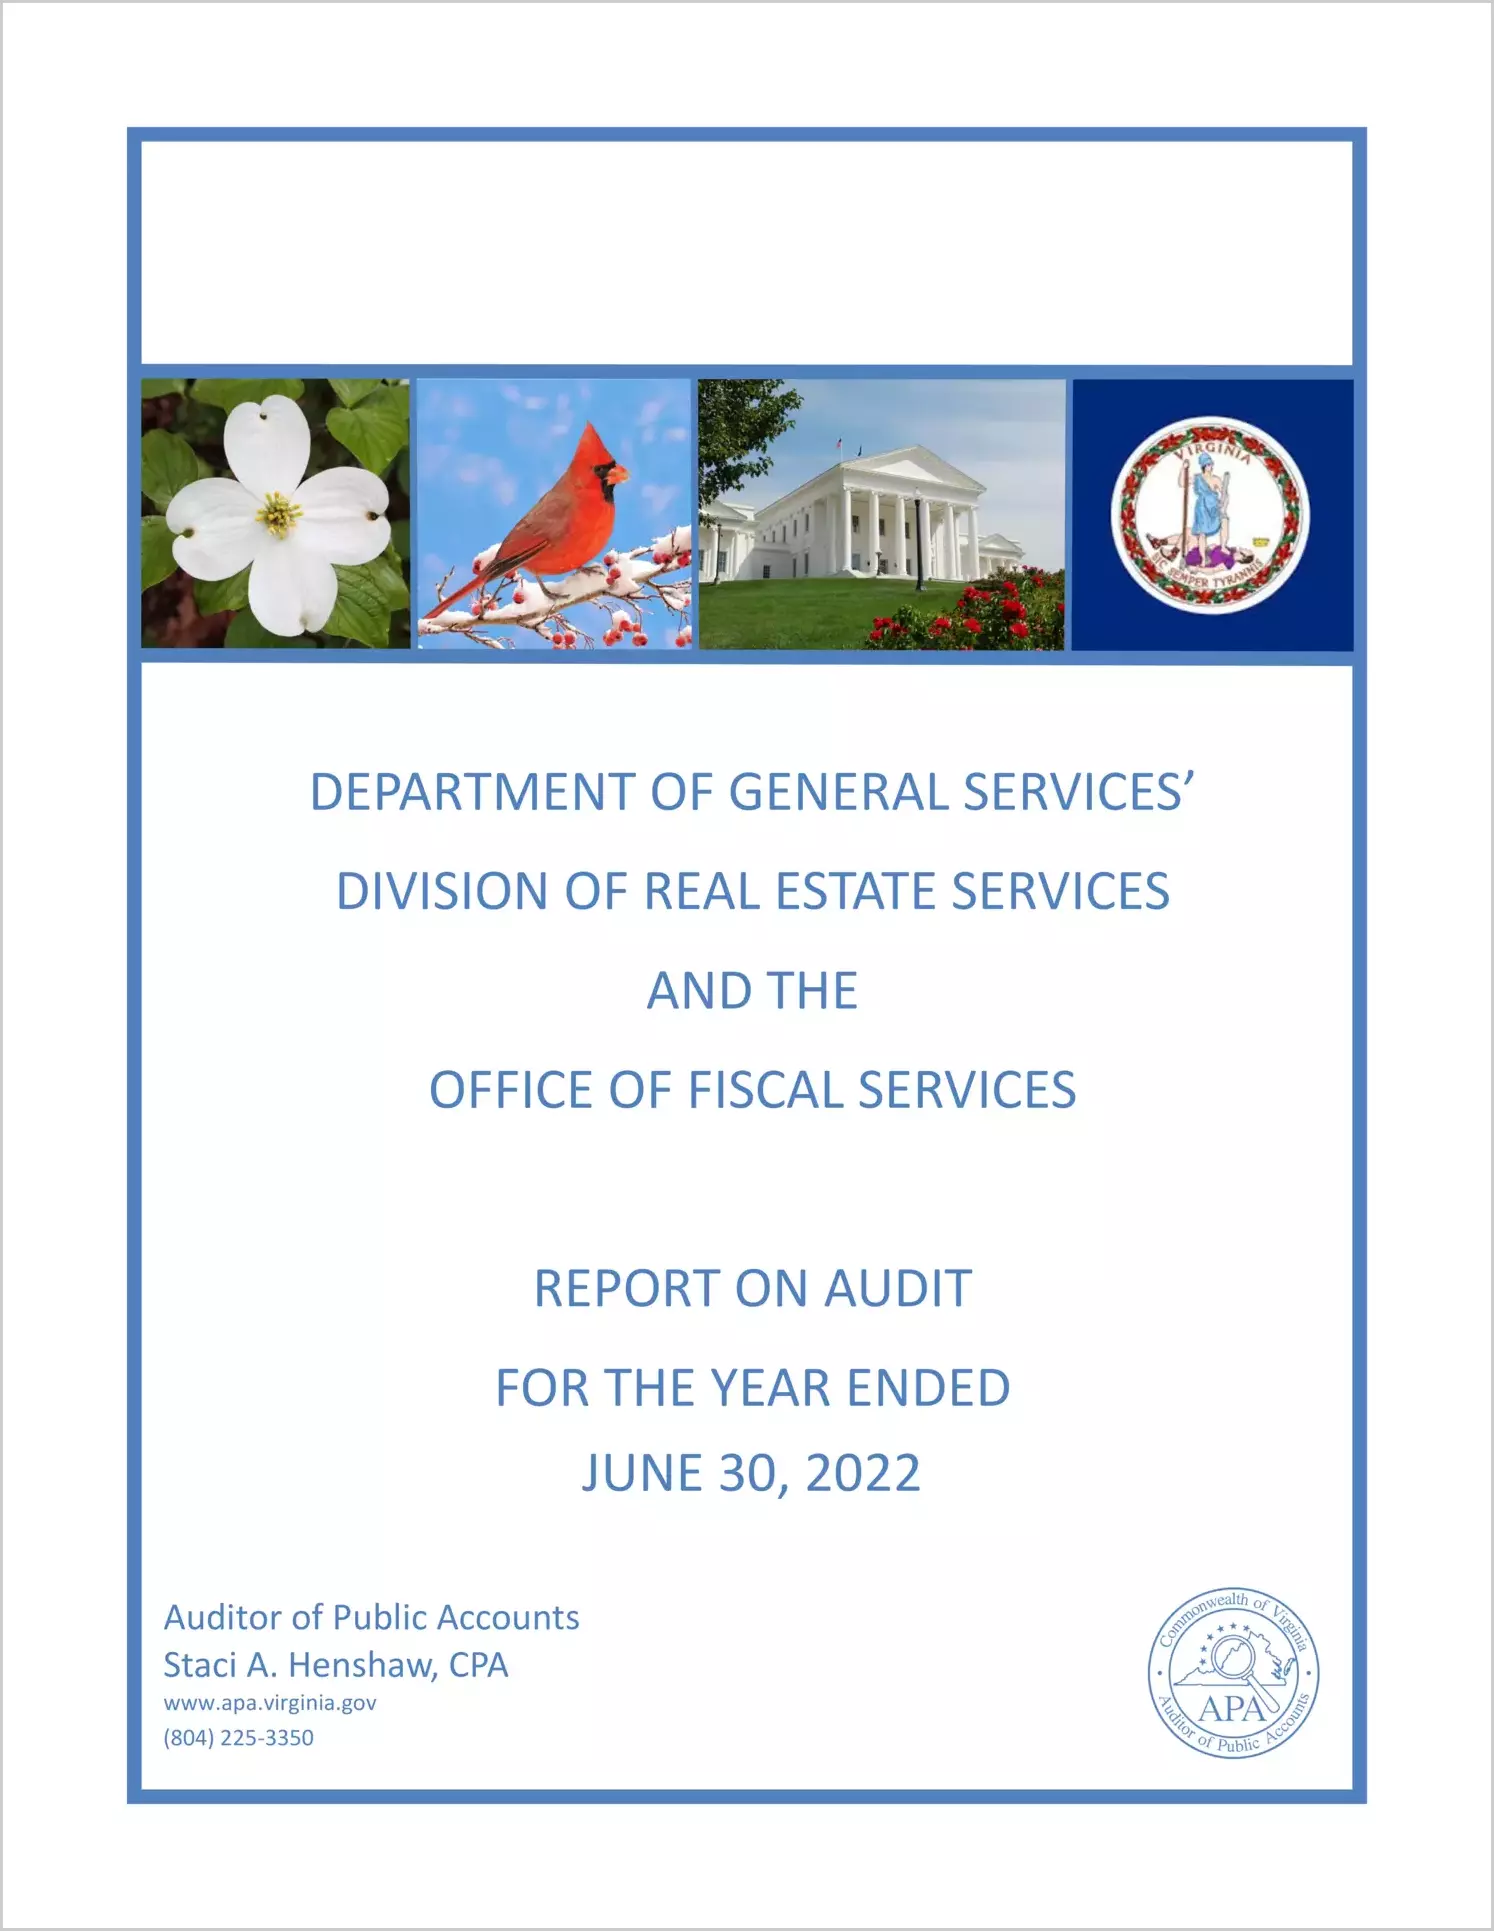 Department of General Service's Division of Real Estate Services and the Office of Fiscal Services for the year ended June 30, 2022